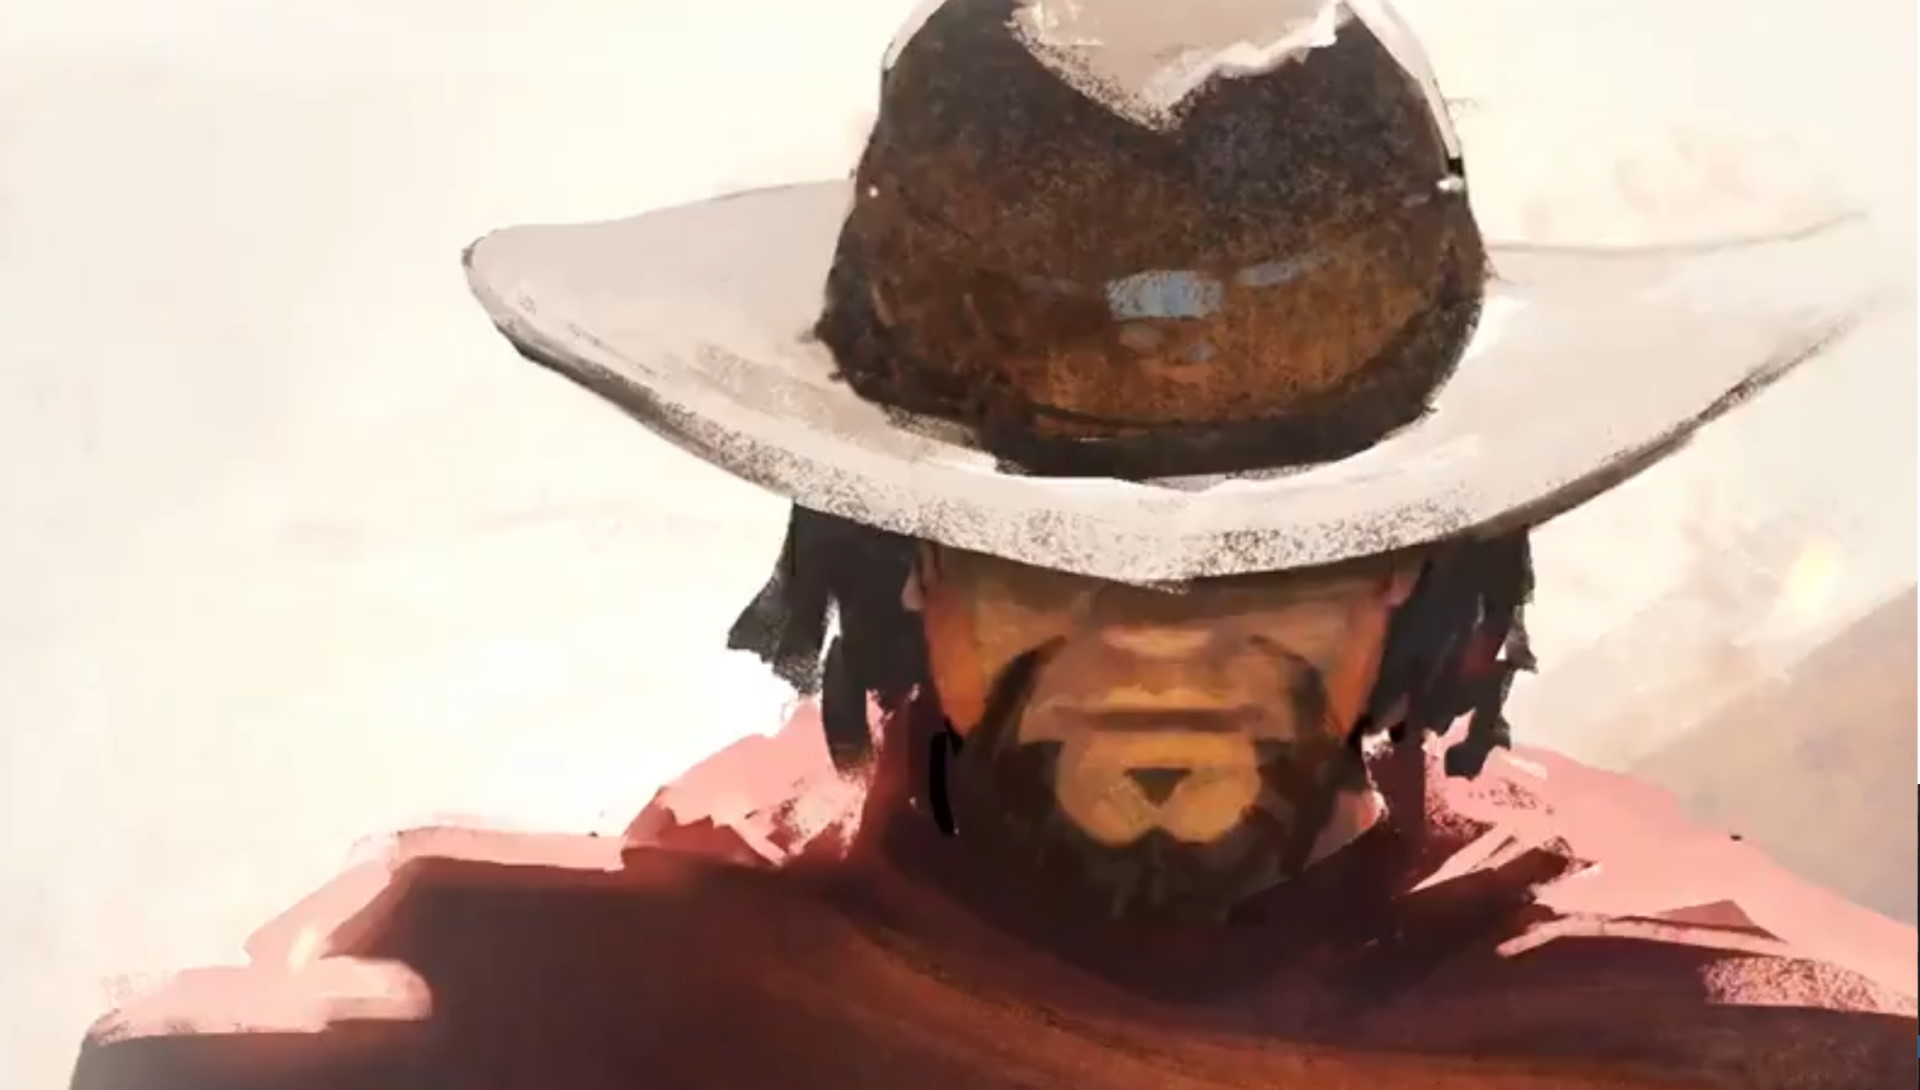  Overwatch's McCree has a new name: Cole Cassidy 